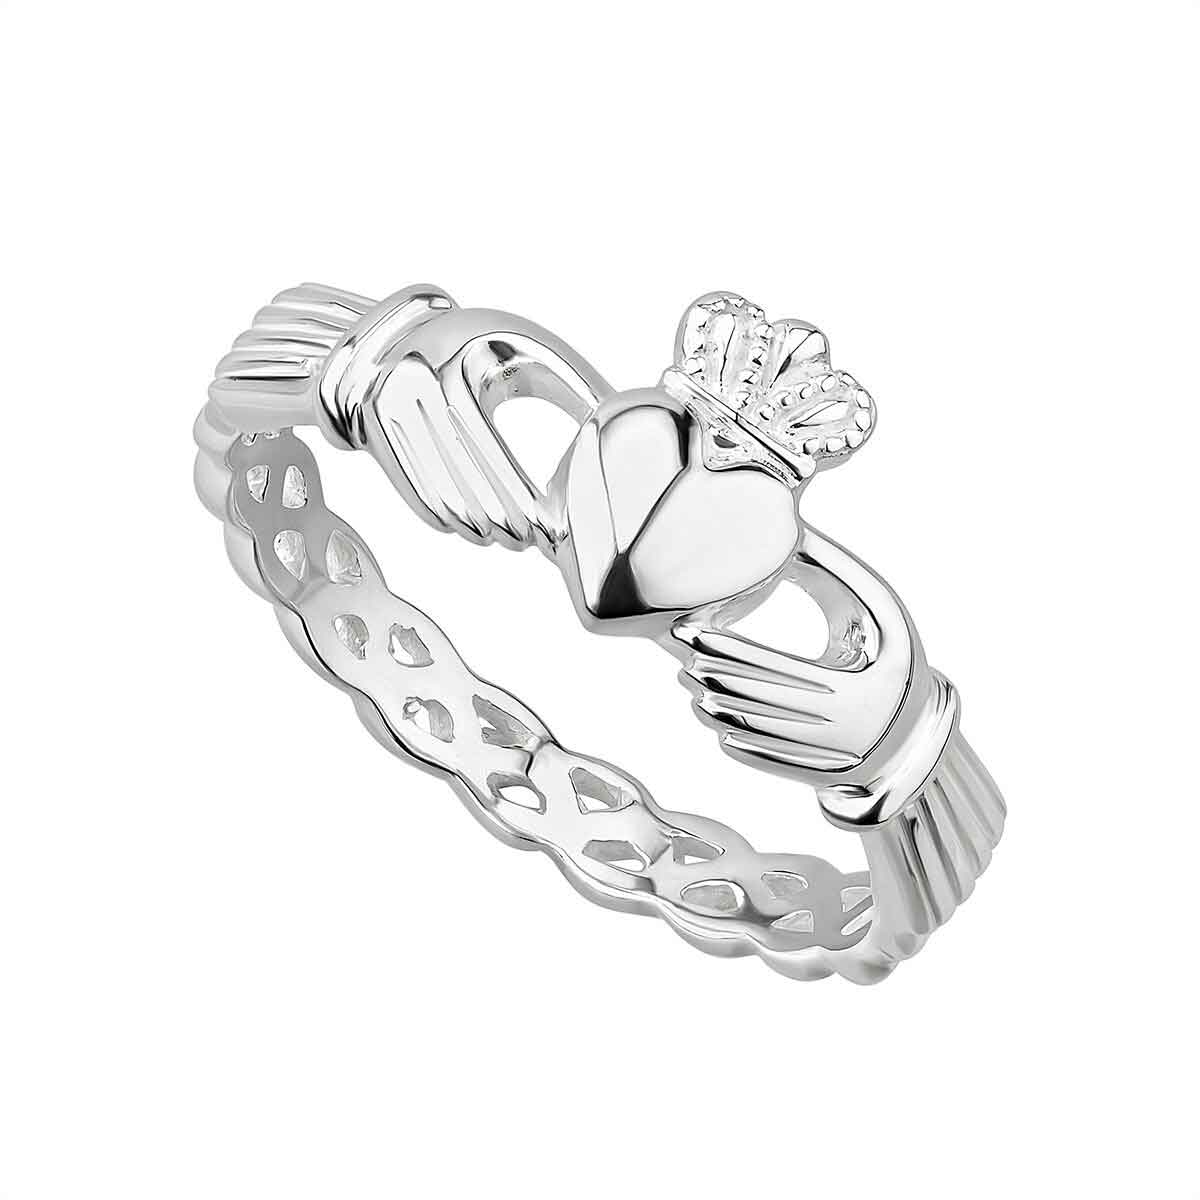 Product image for Claddagh Ring - Ladies Sterling Silver Claddagh Weave